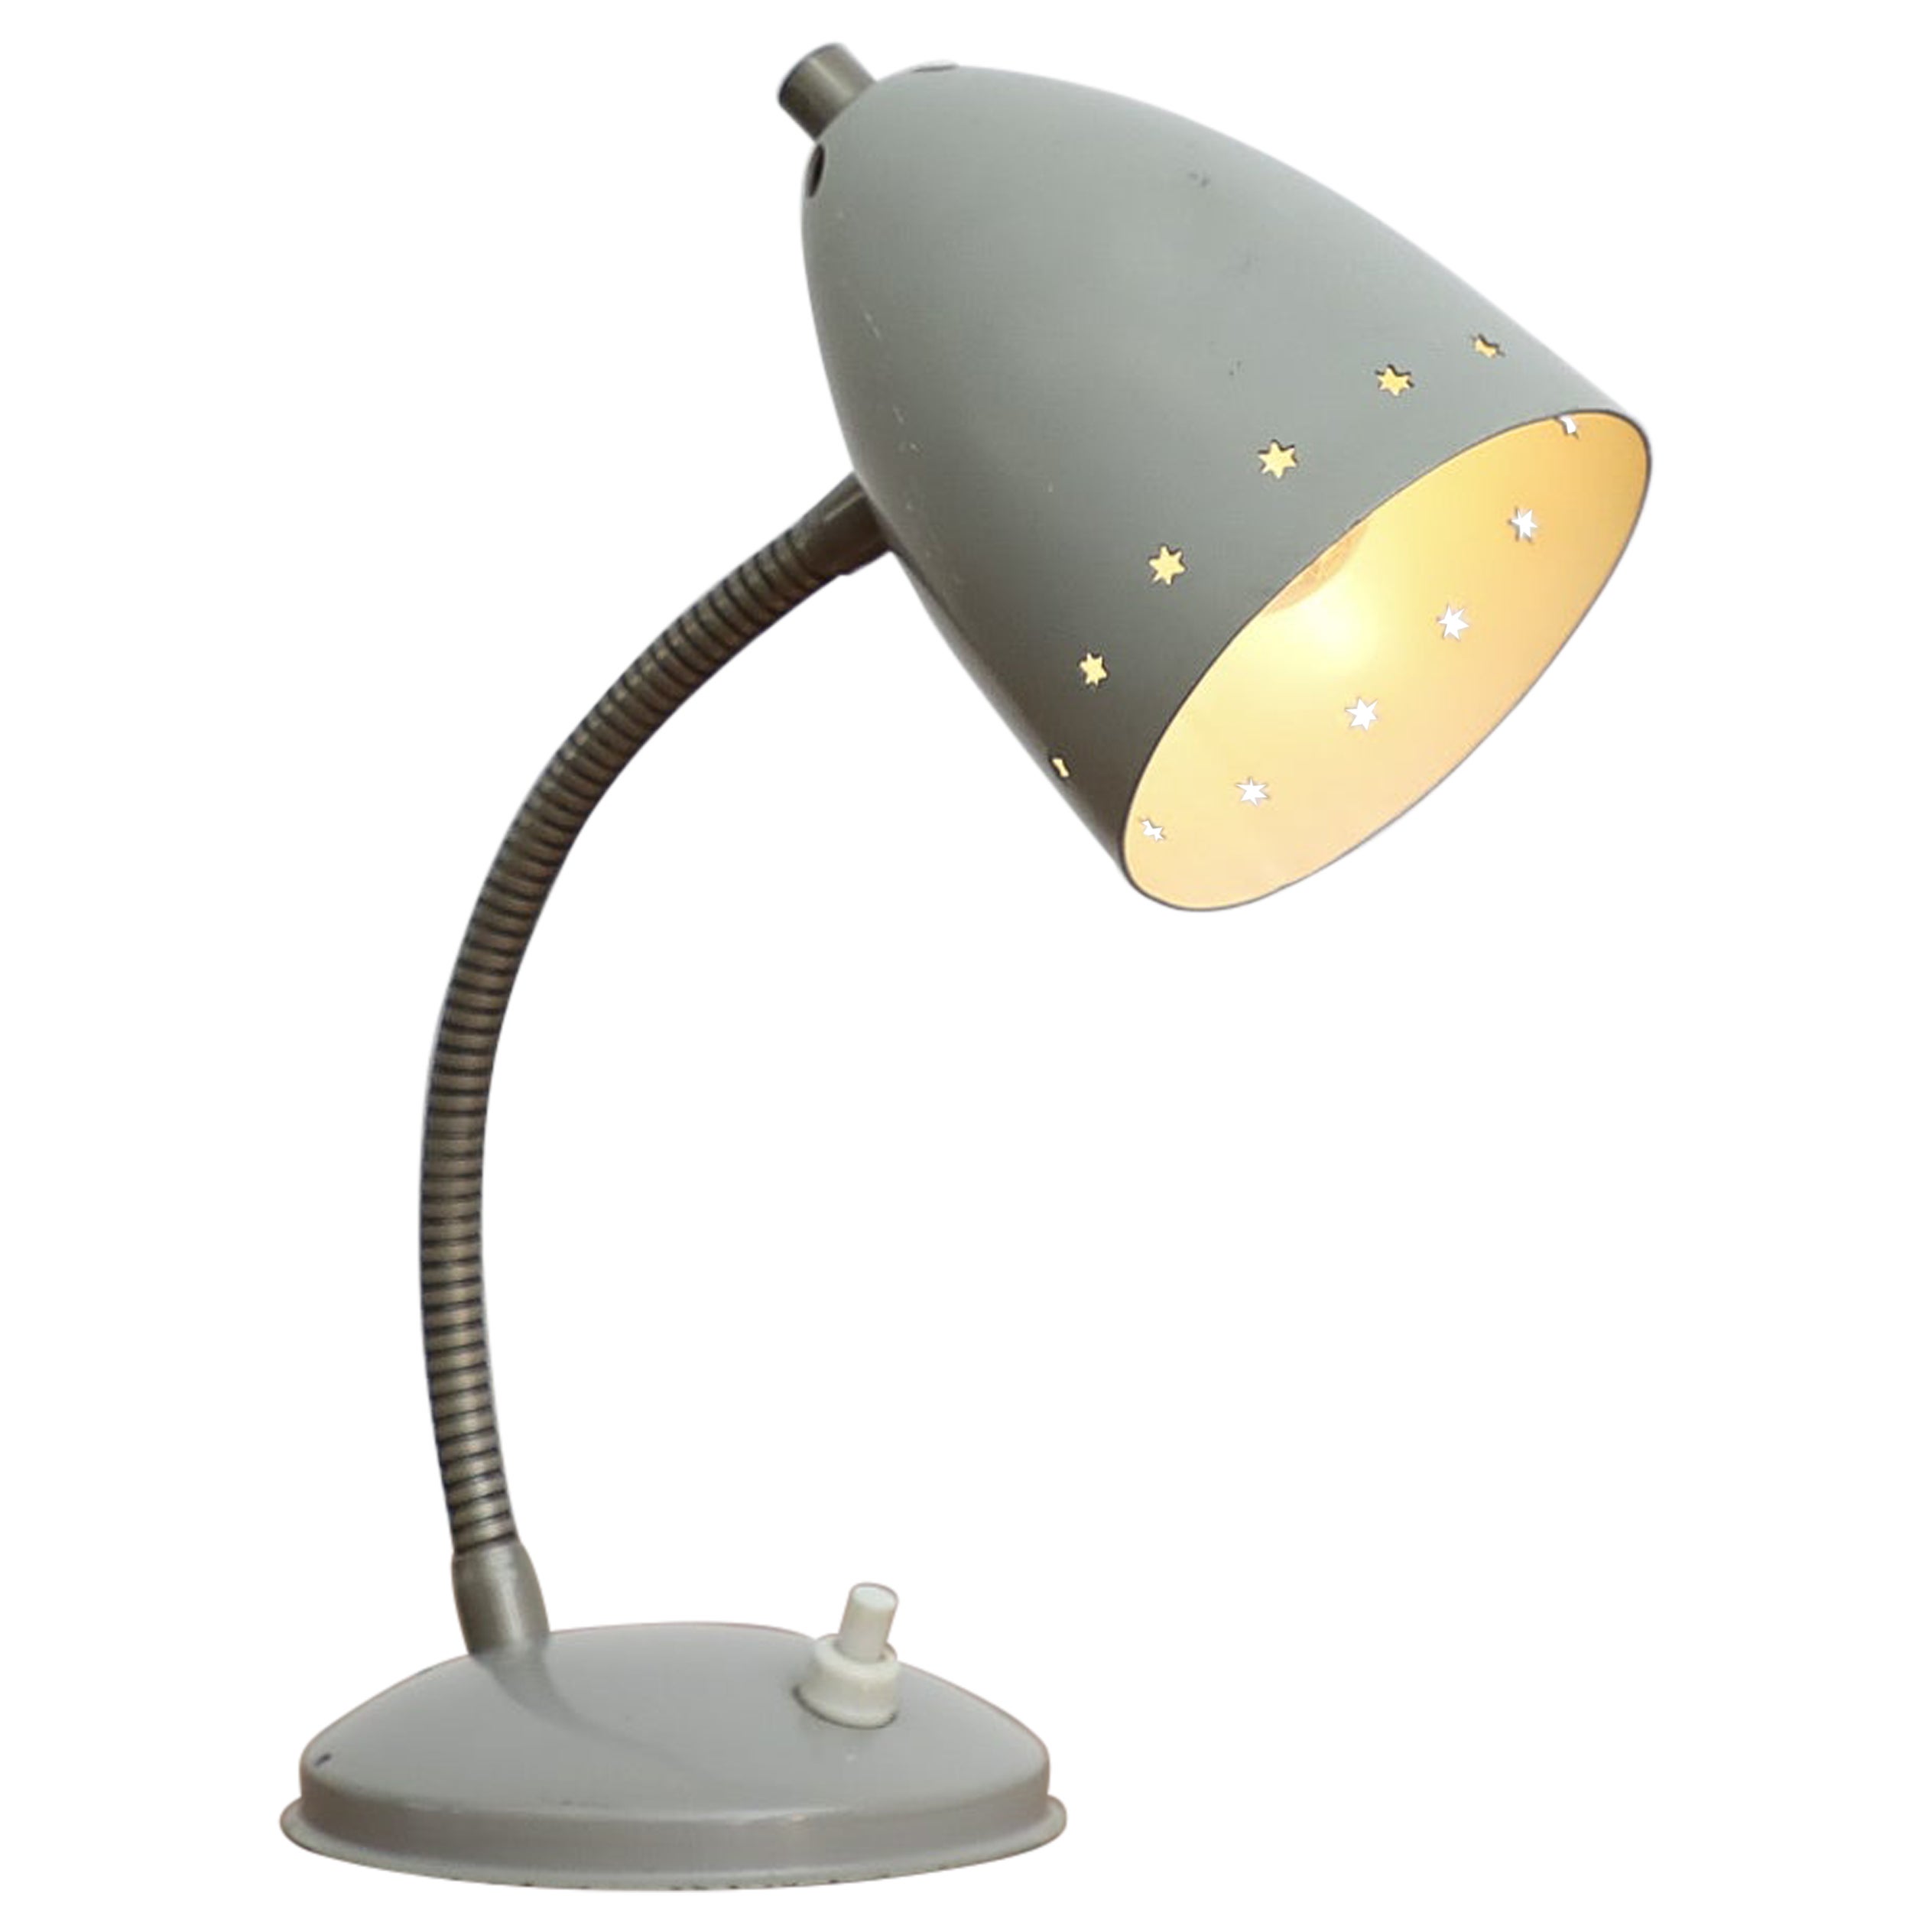 Little Grey Mid-Century Hala Zeist Reading Lamp with Star Cut-outs on Shade